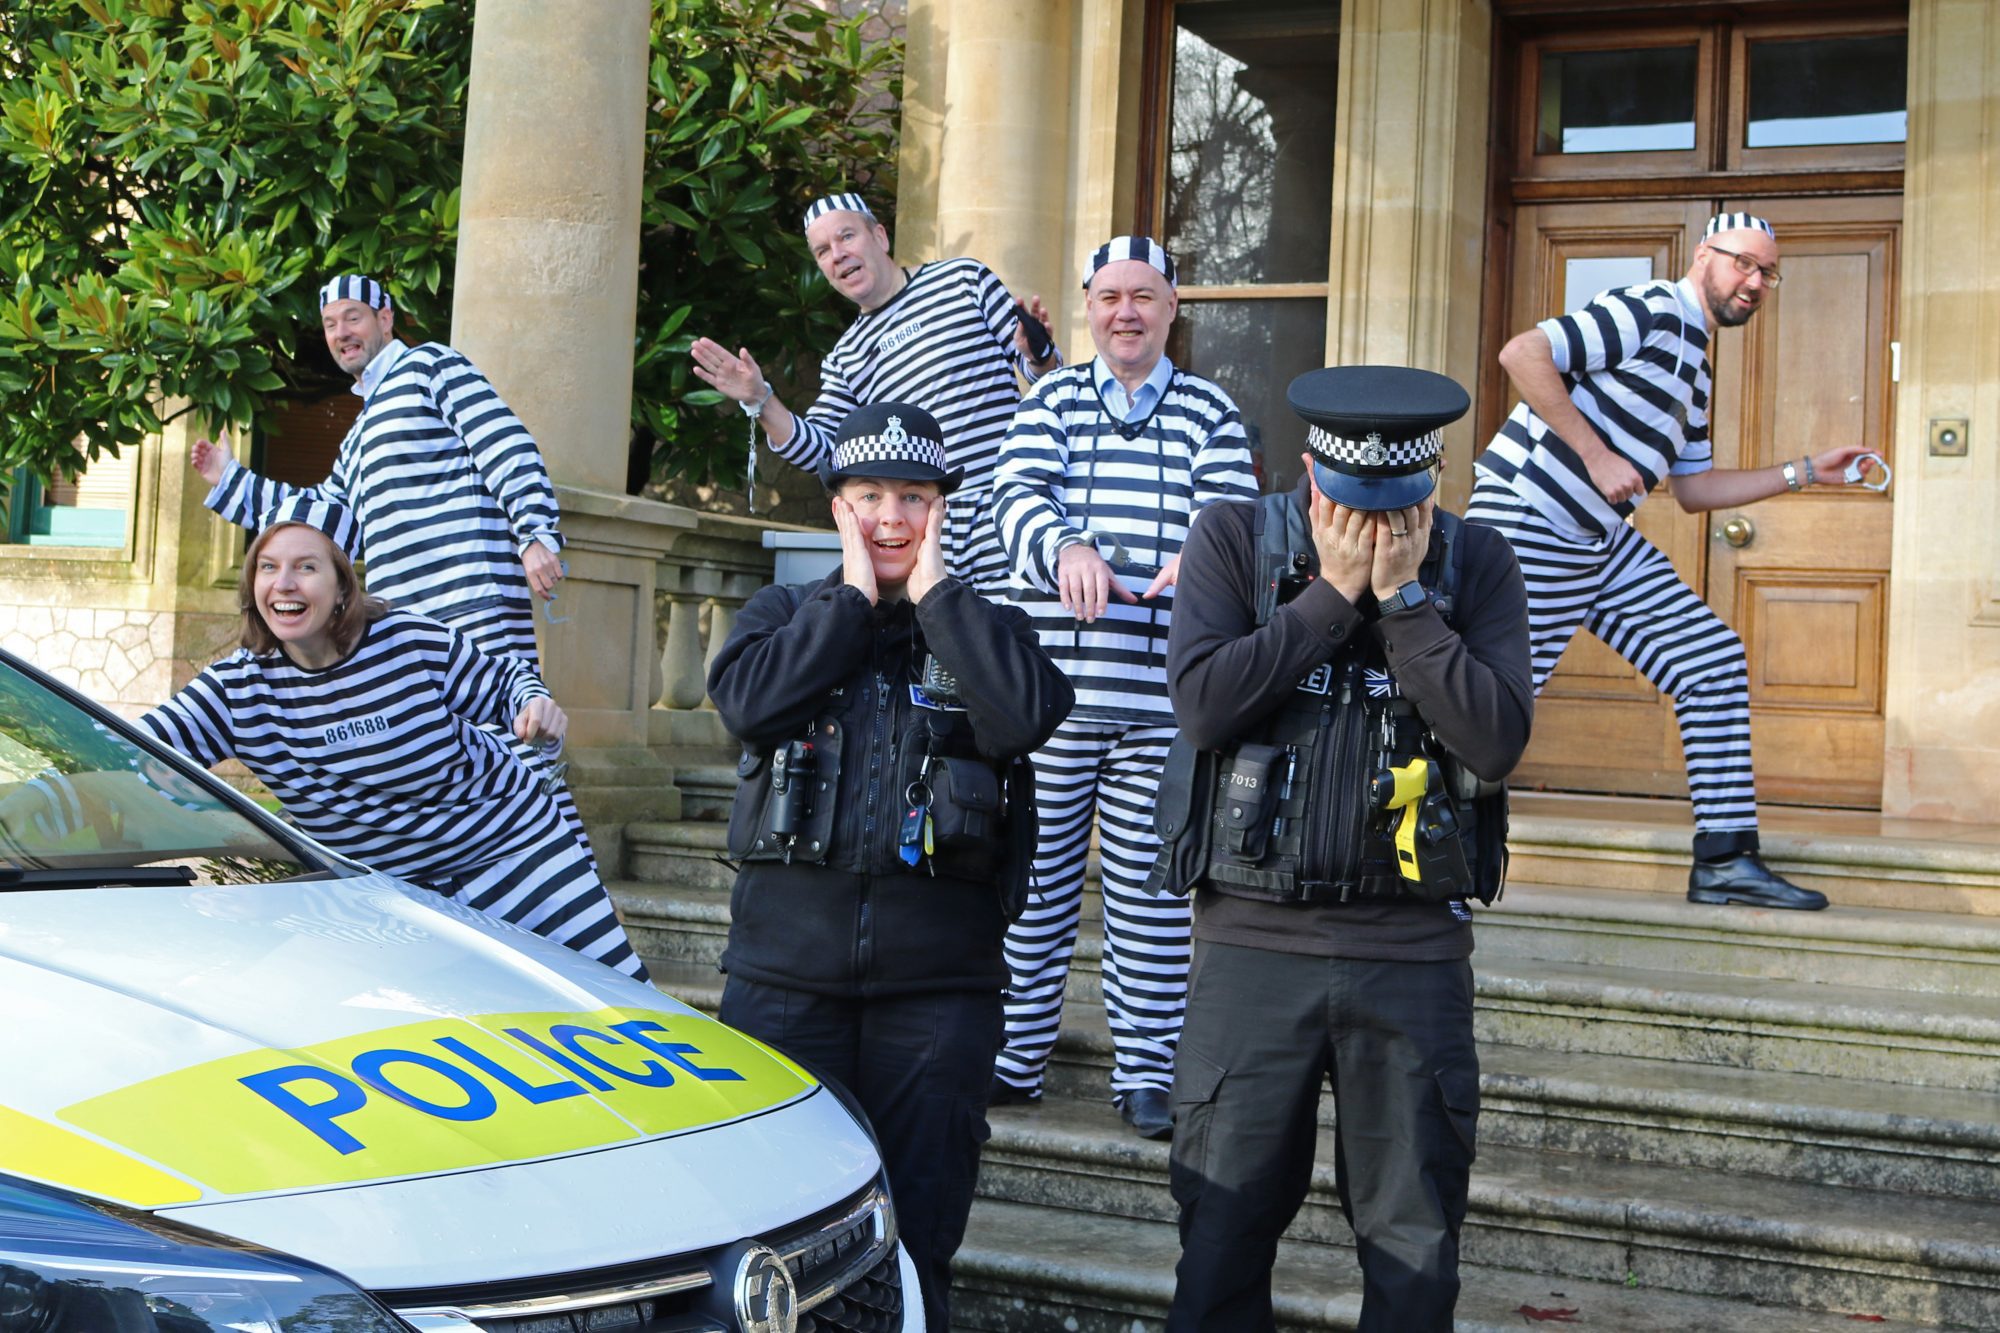 Local business people dress up in convict outfits with local police.